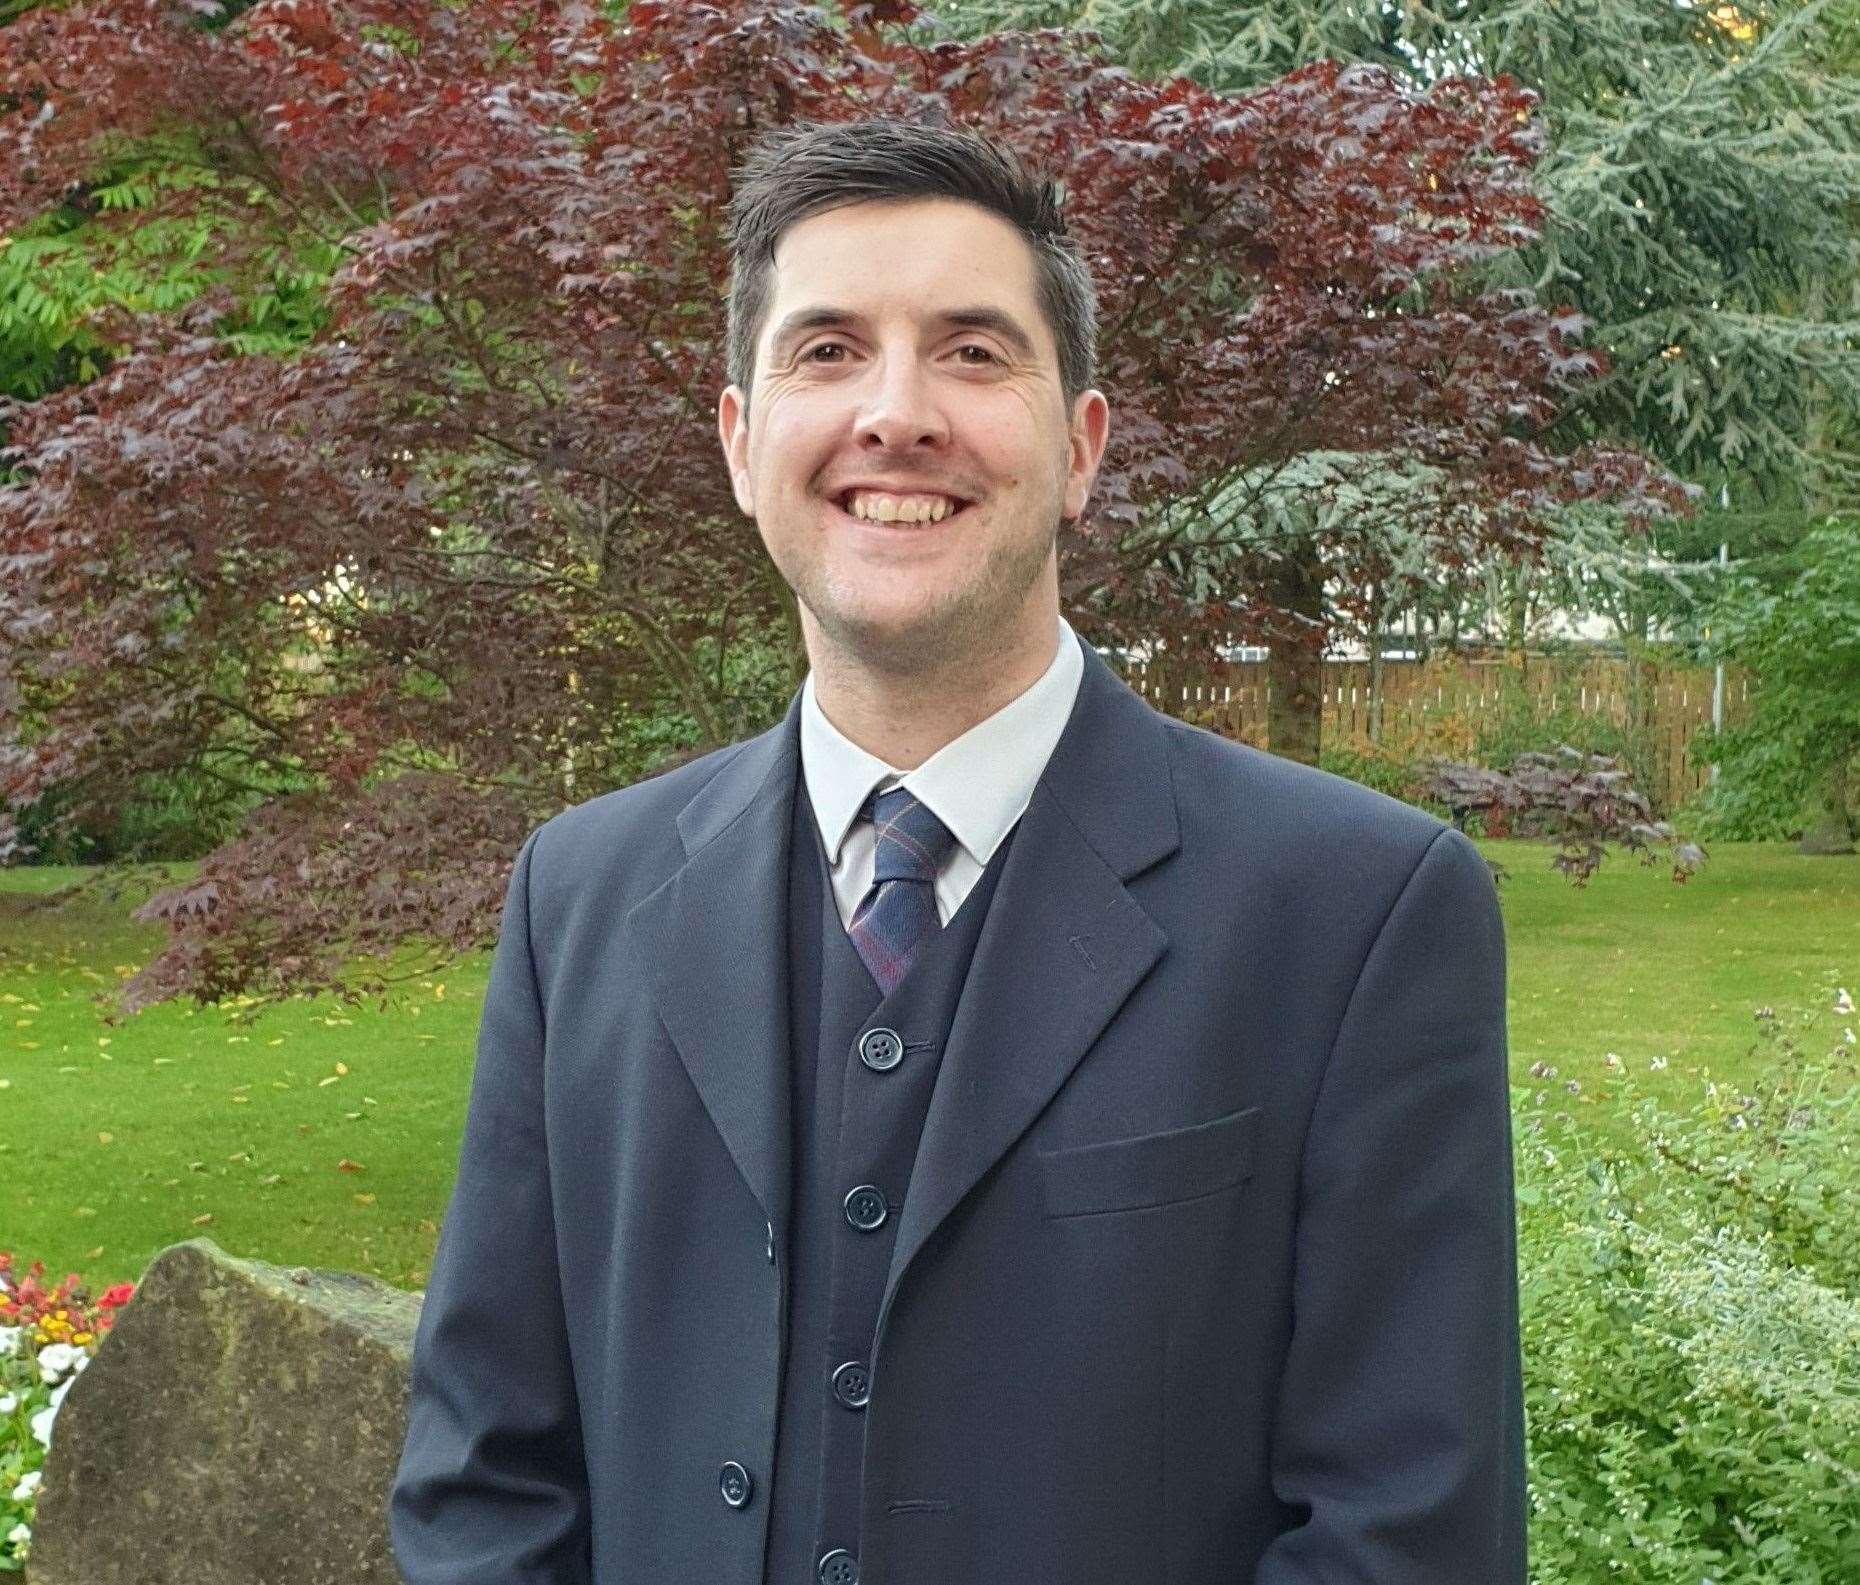 Barry Weiland-Jarvis, who is hoping to appear as an SNP list candidate at this year's Scottish Parliamentary Election.